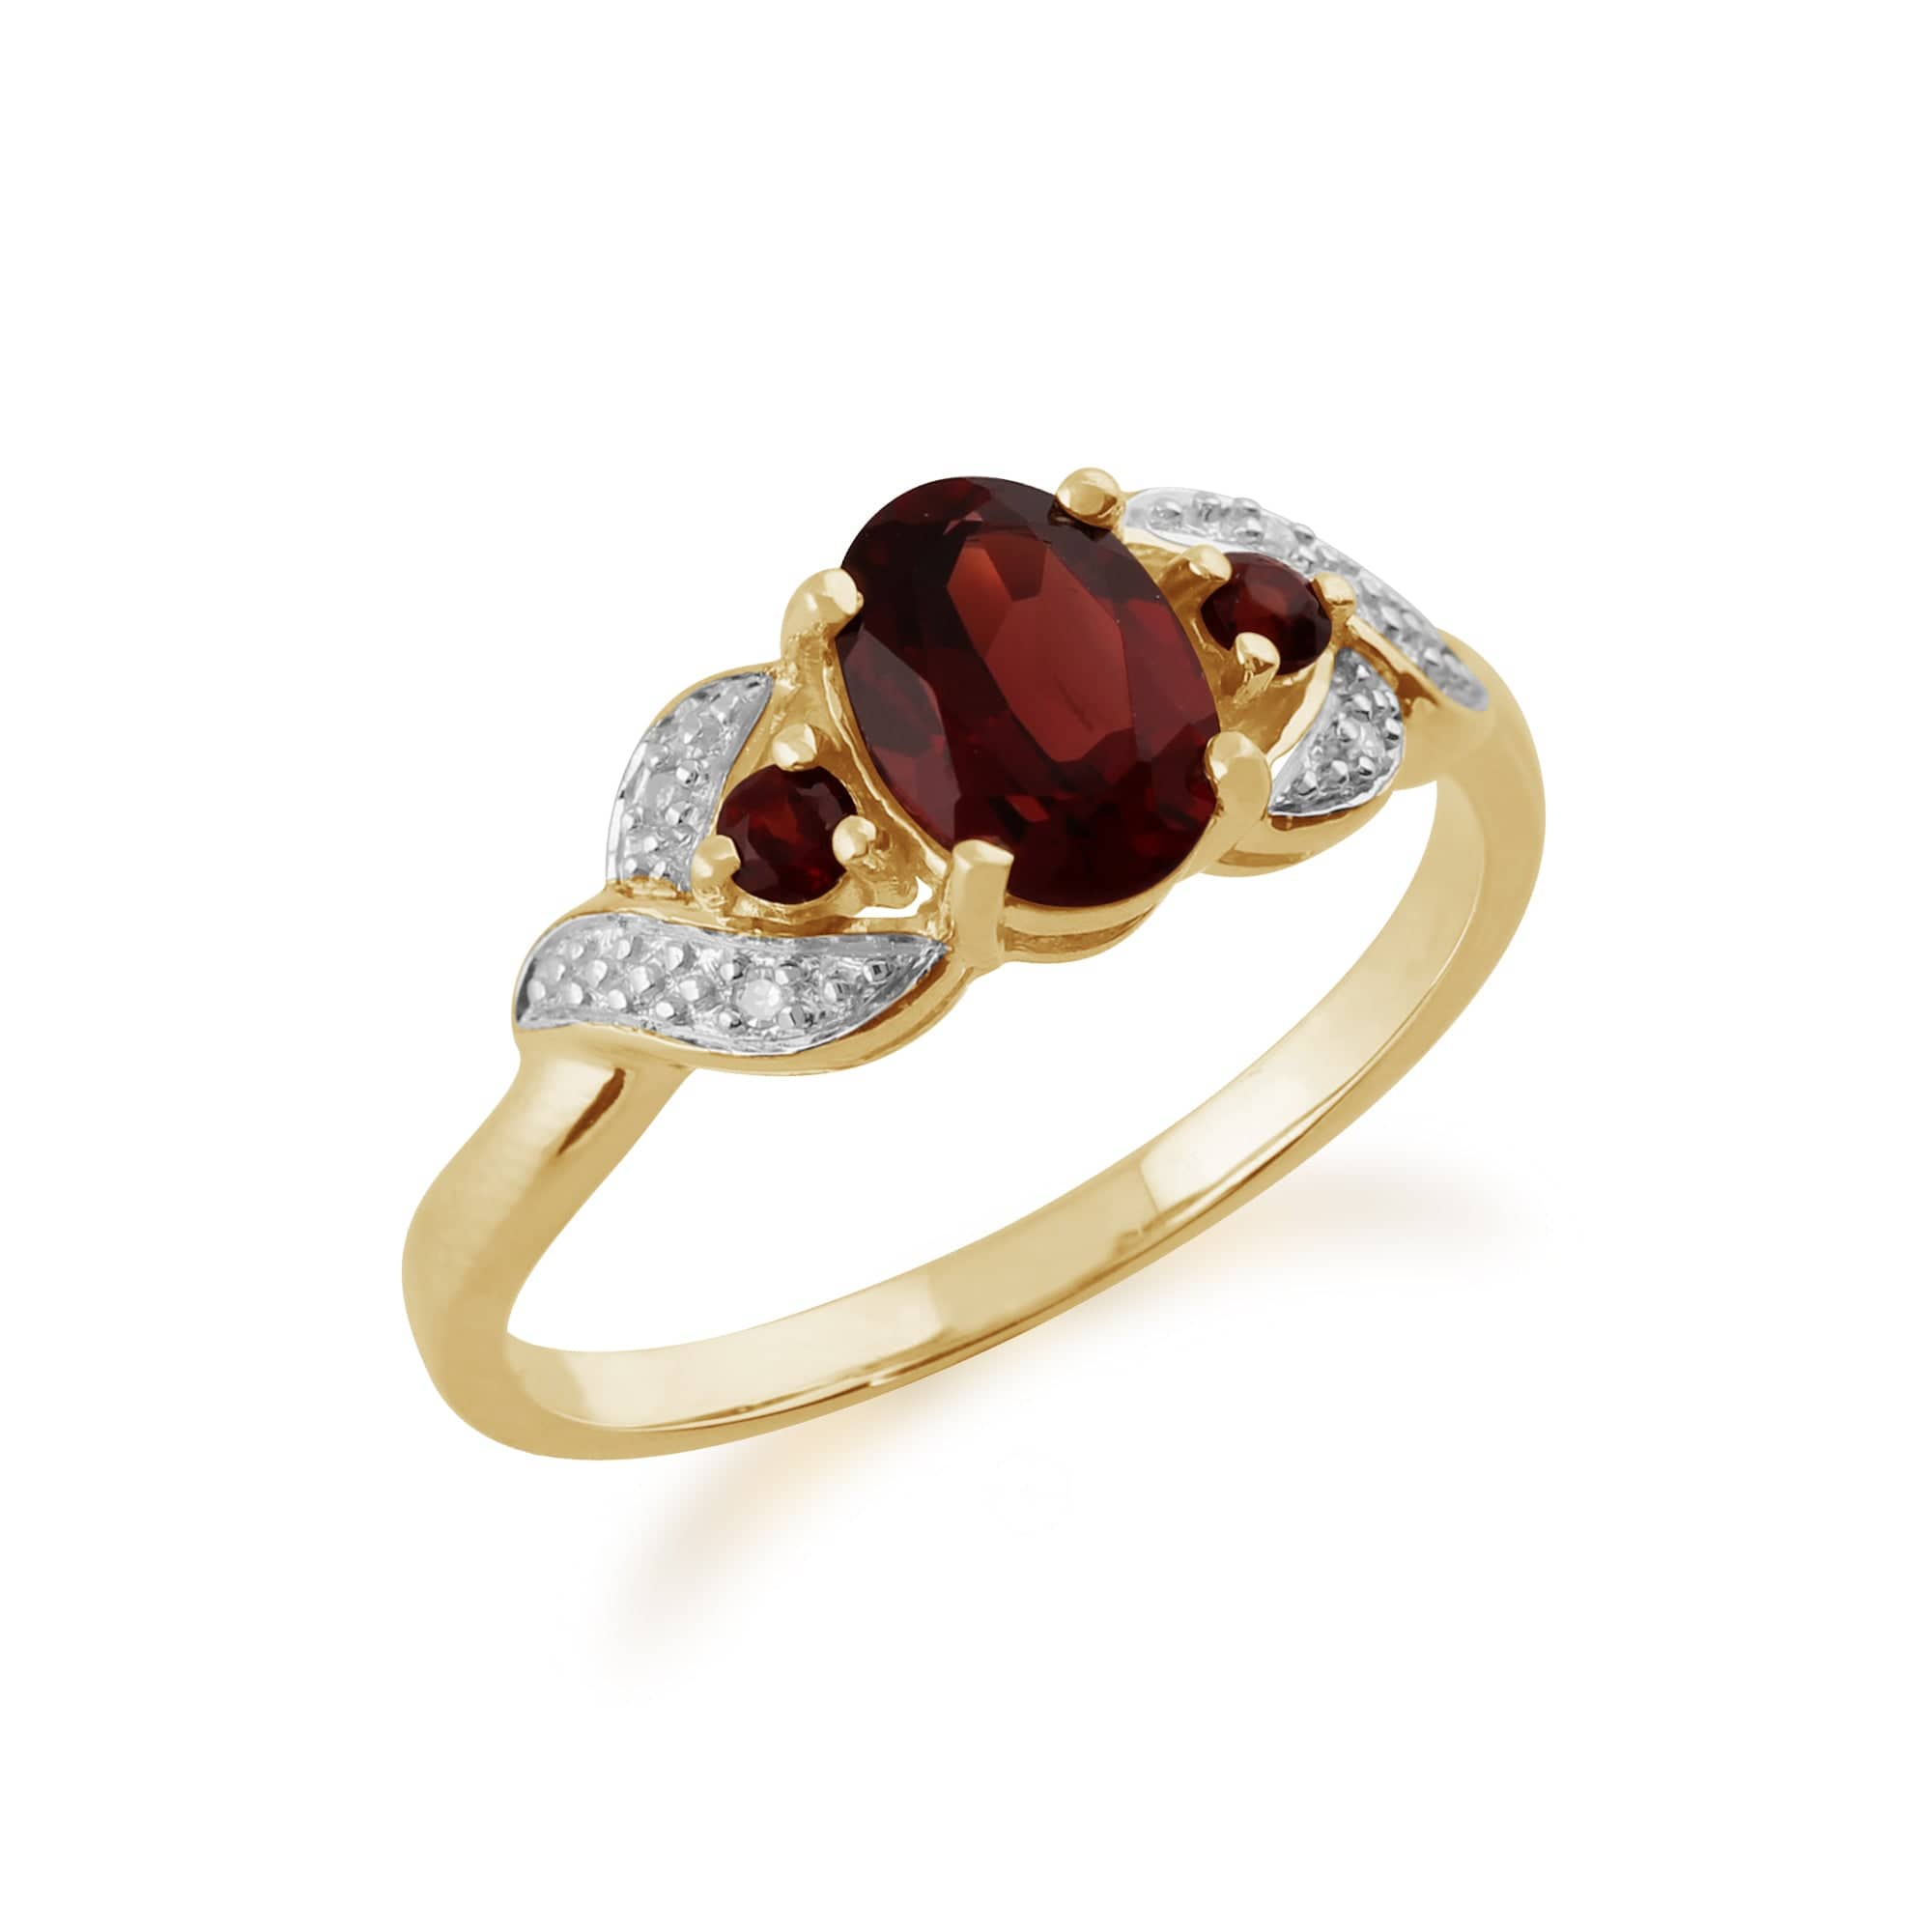 183R3430099 Classic Oval Mozambique Garnet & Diamond Ring in 9ct Yellow Gold 2